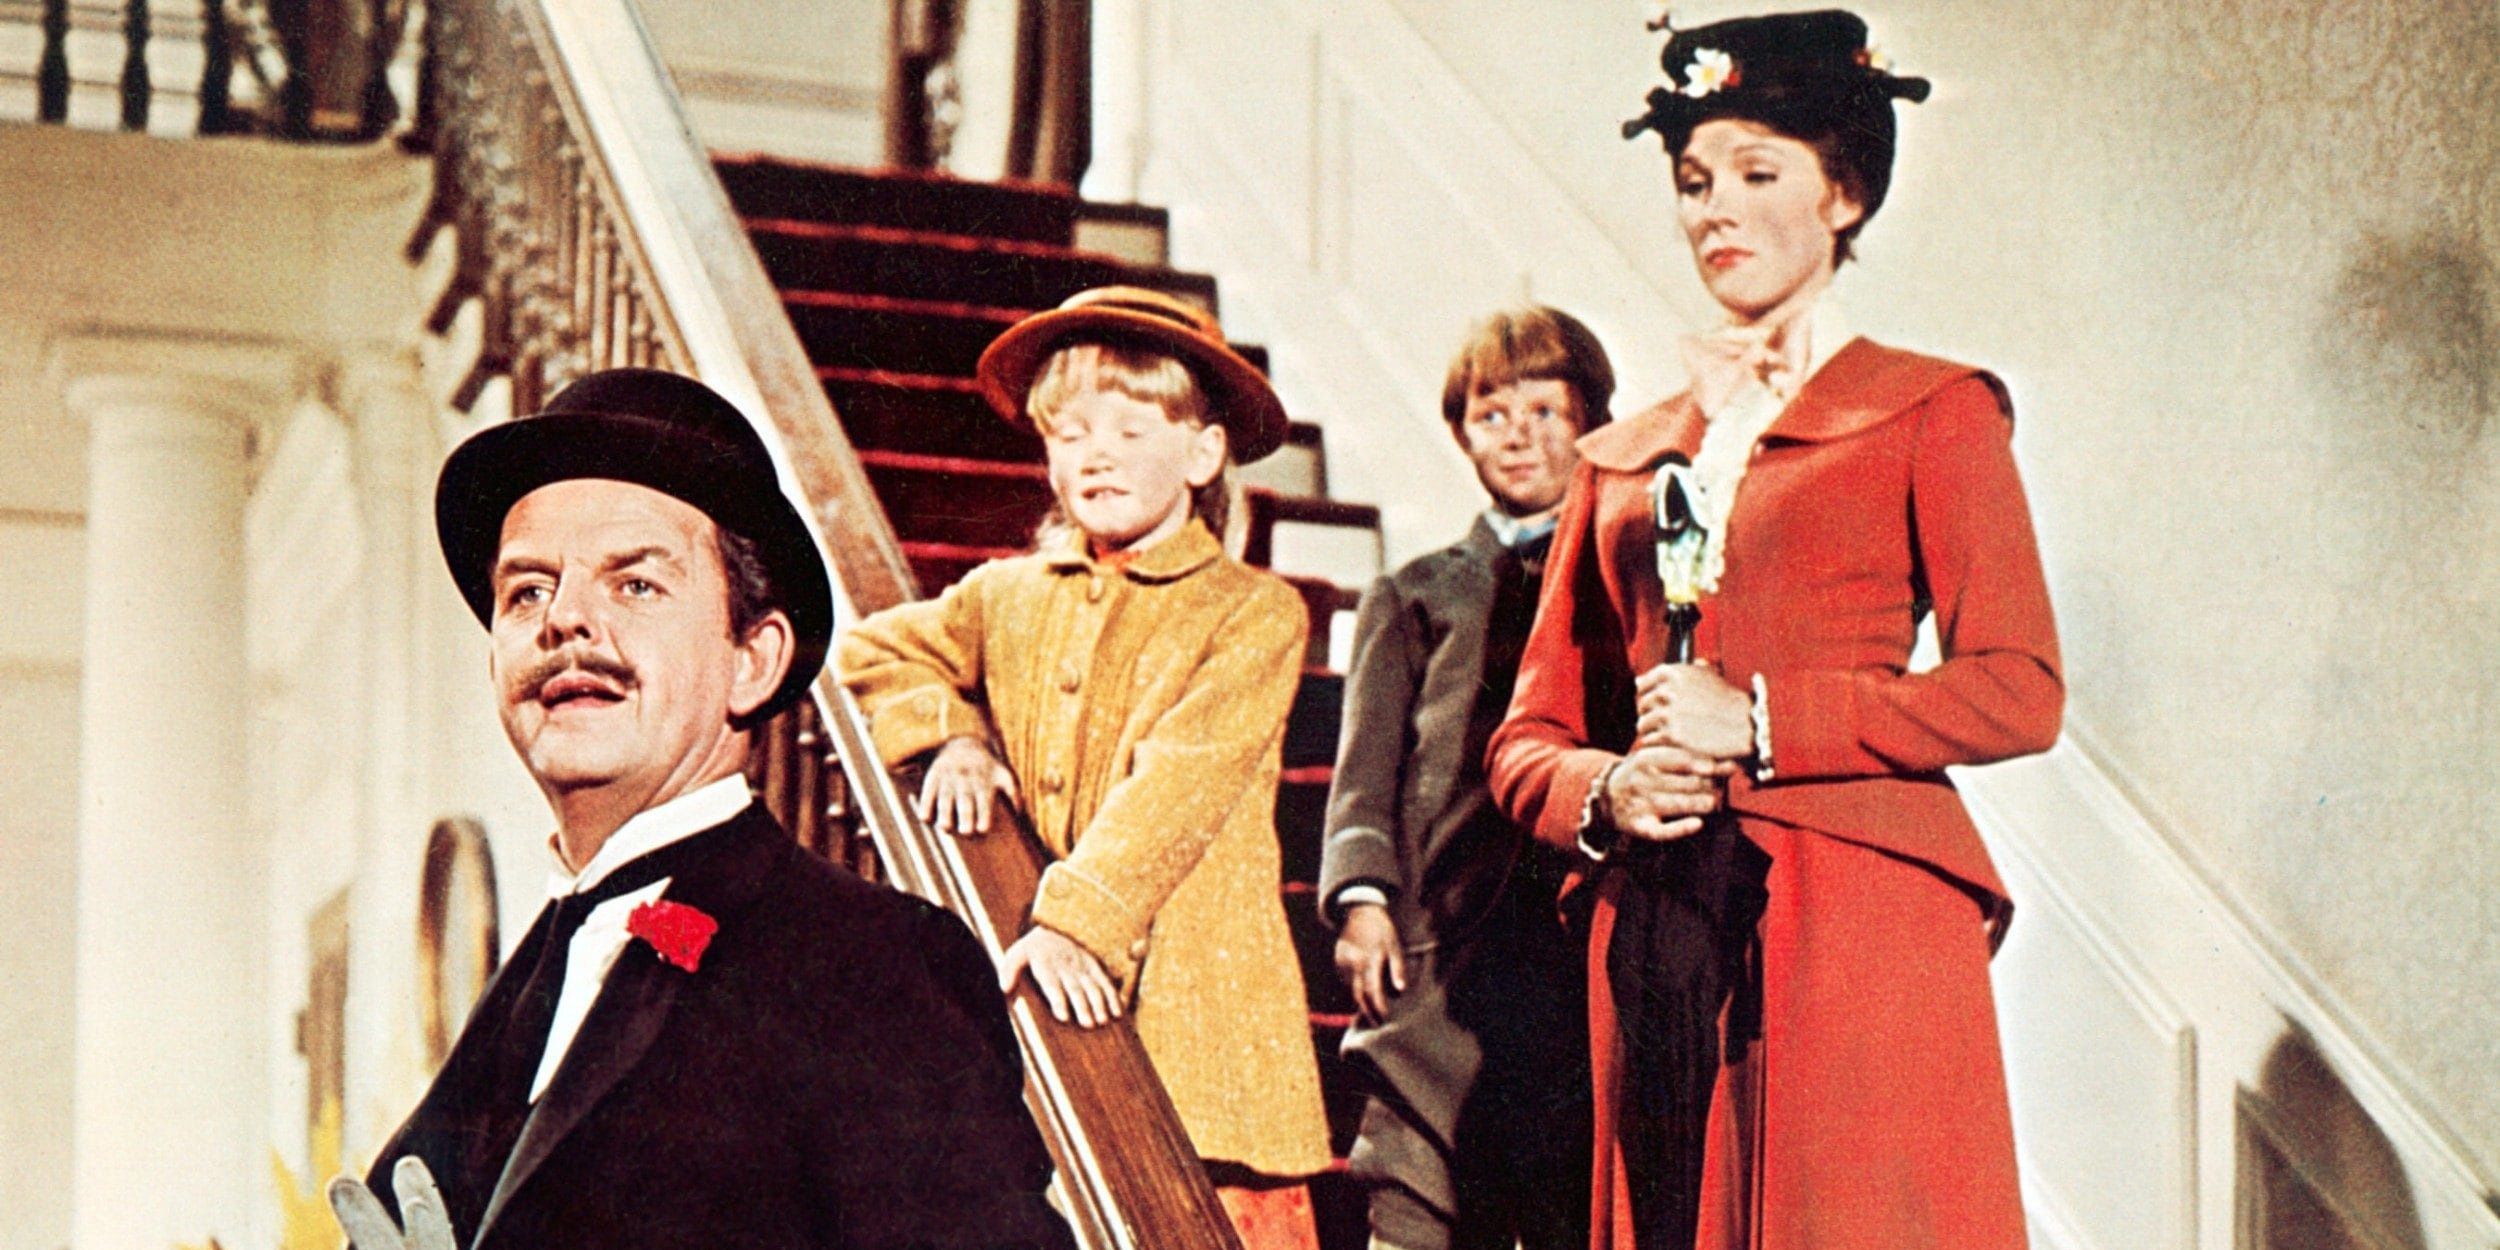 Mary and the Banks children stand on the stairs with Mr. Banks in front of them in Mary Poppins